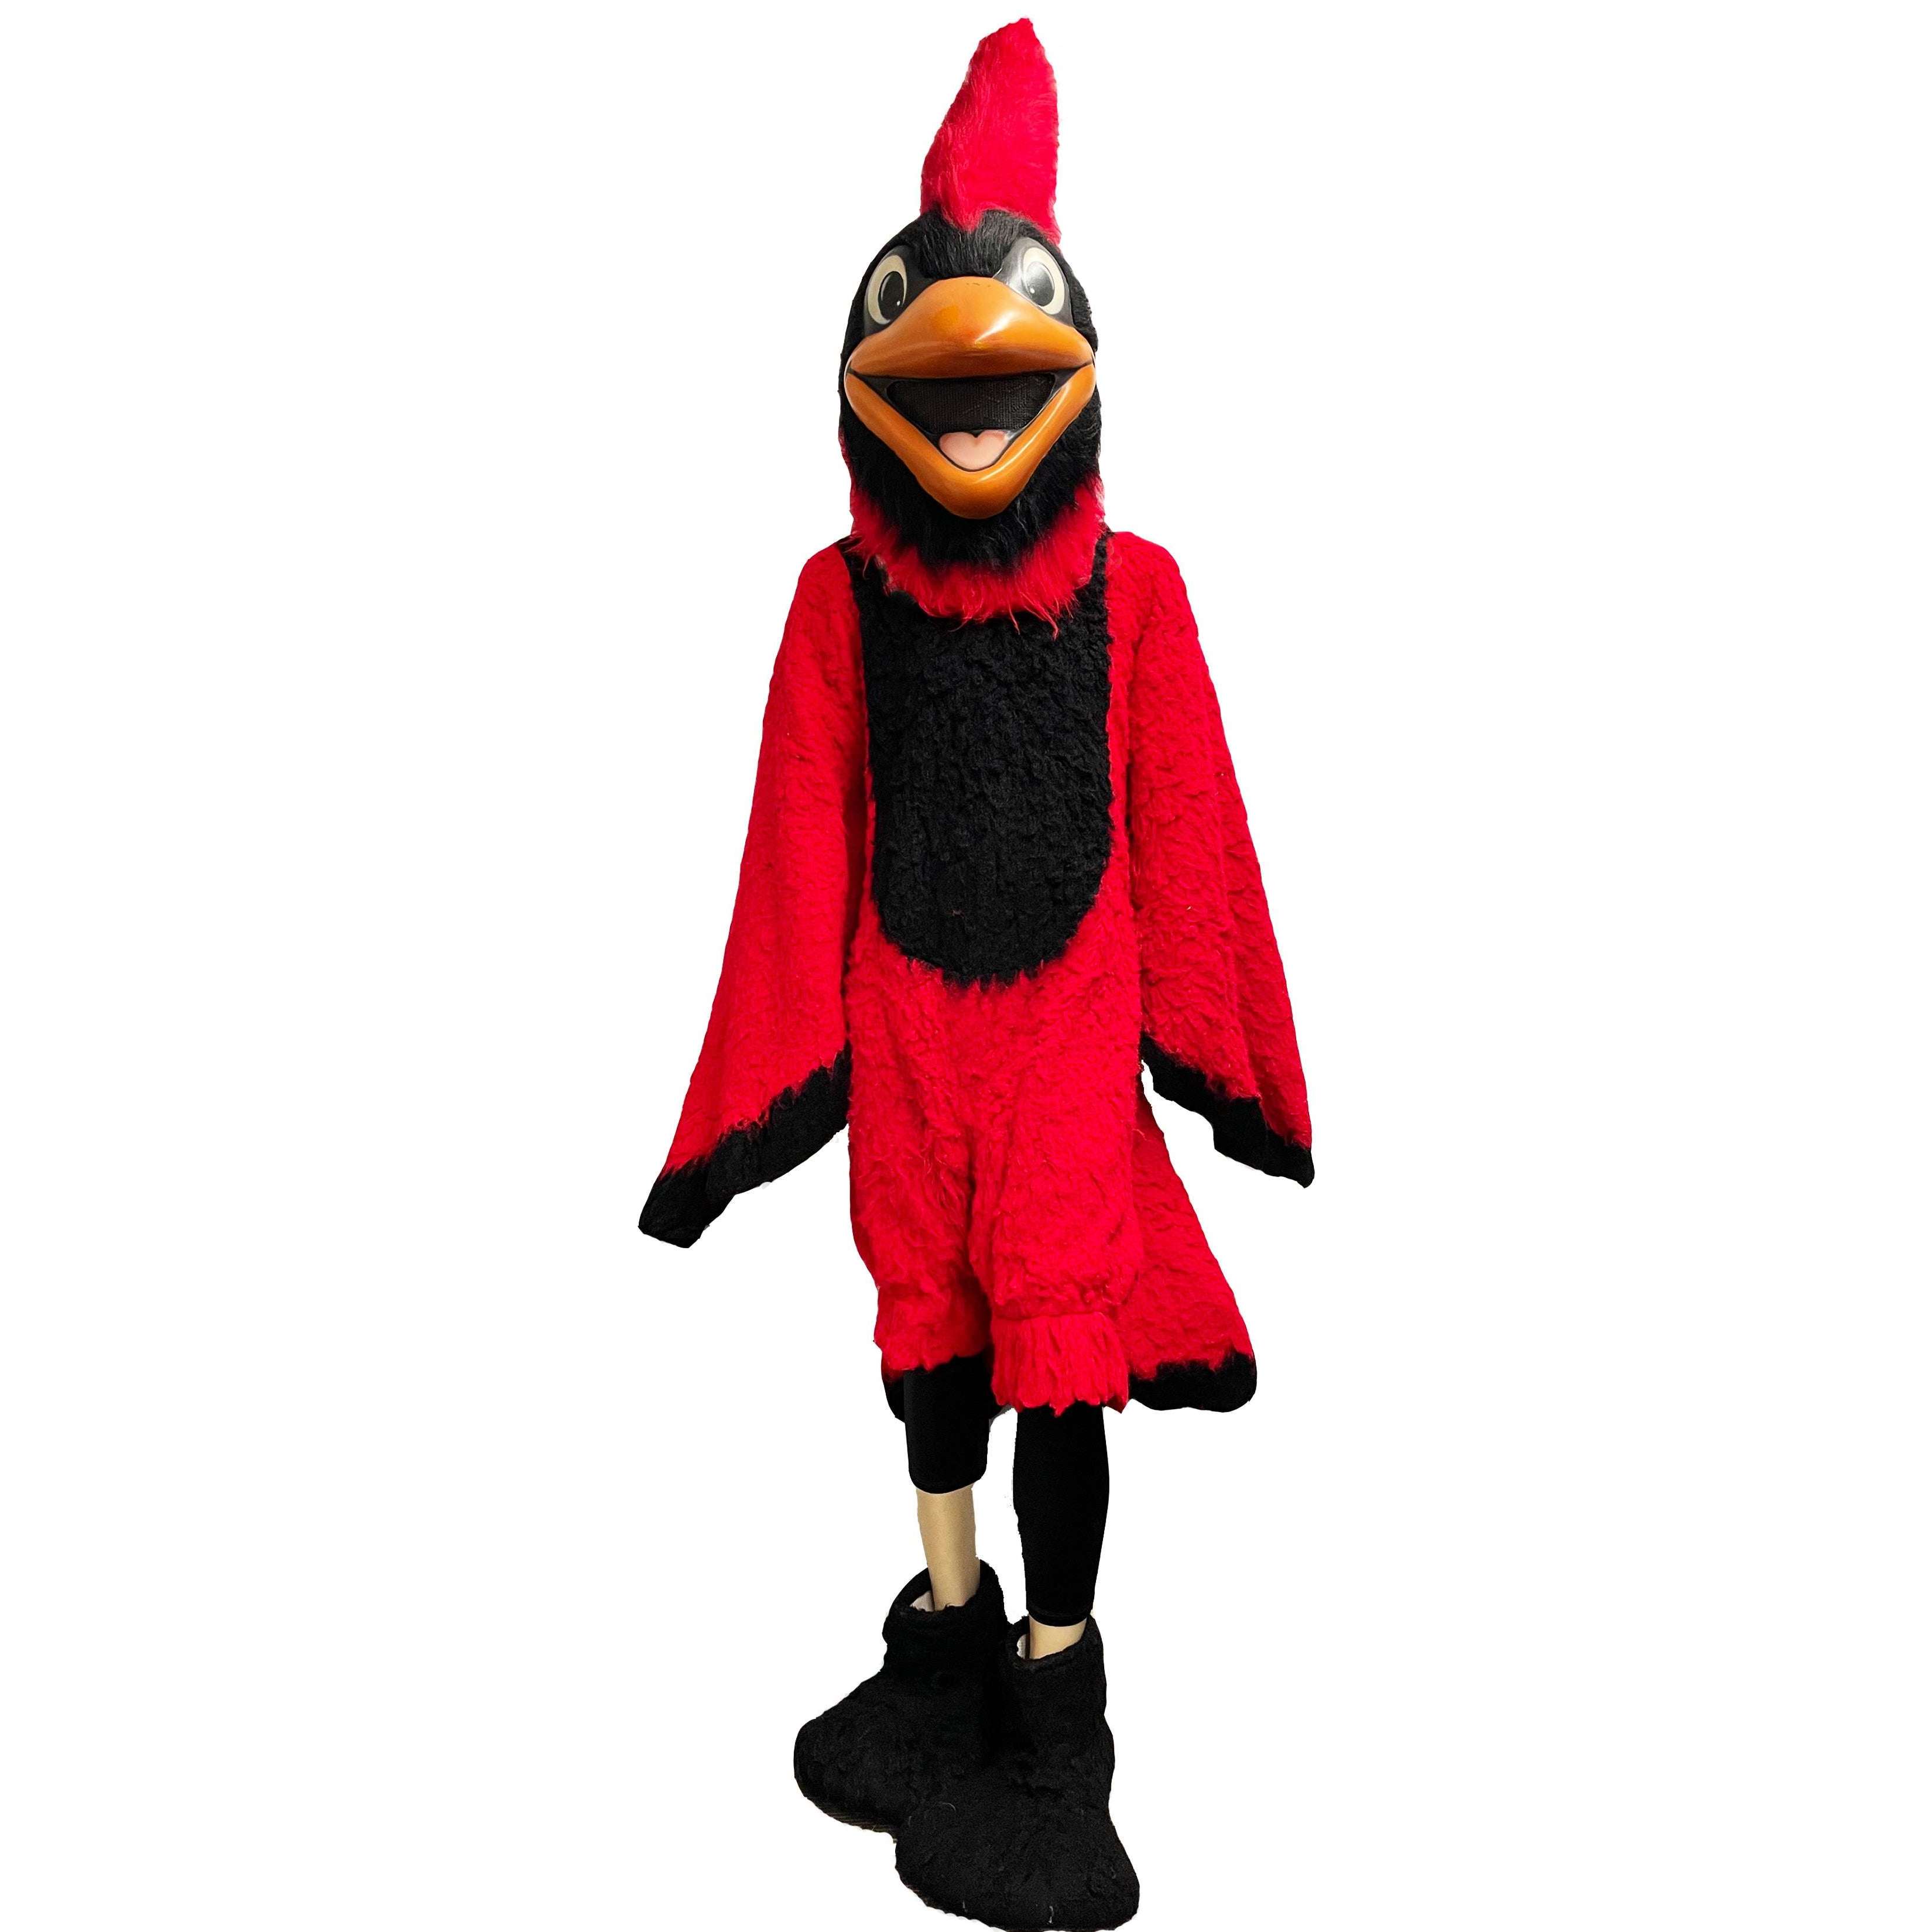 Red Cardinal Mascot Adult Costume